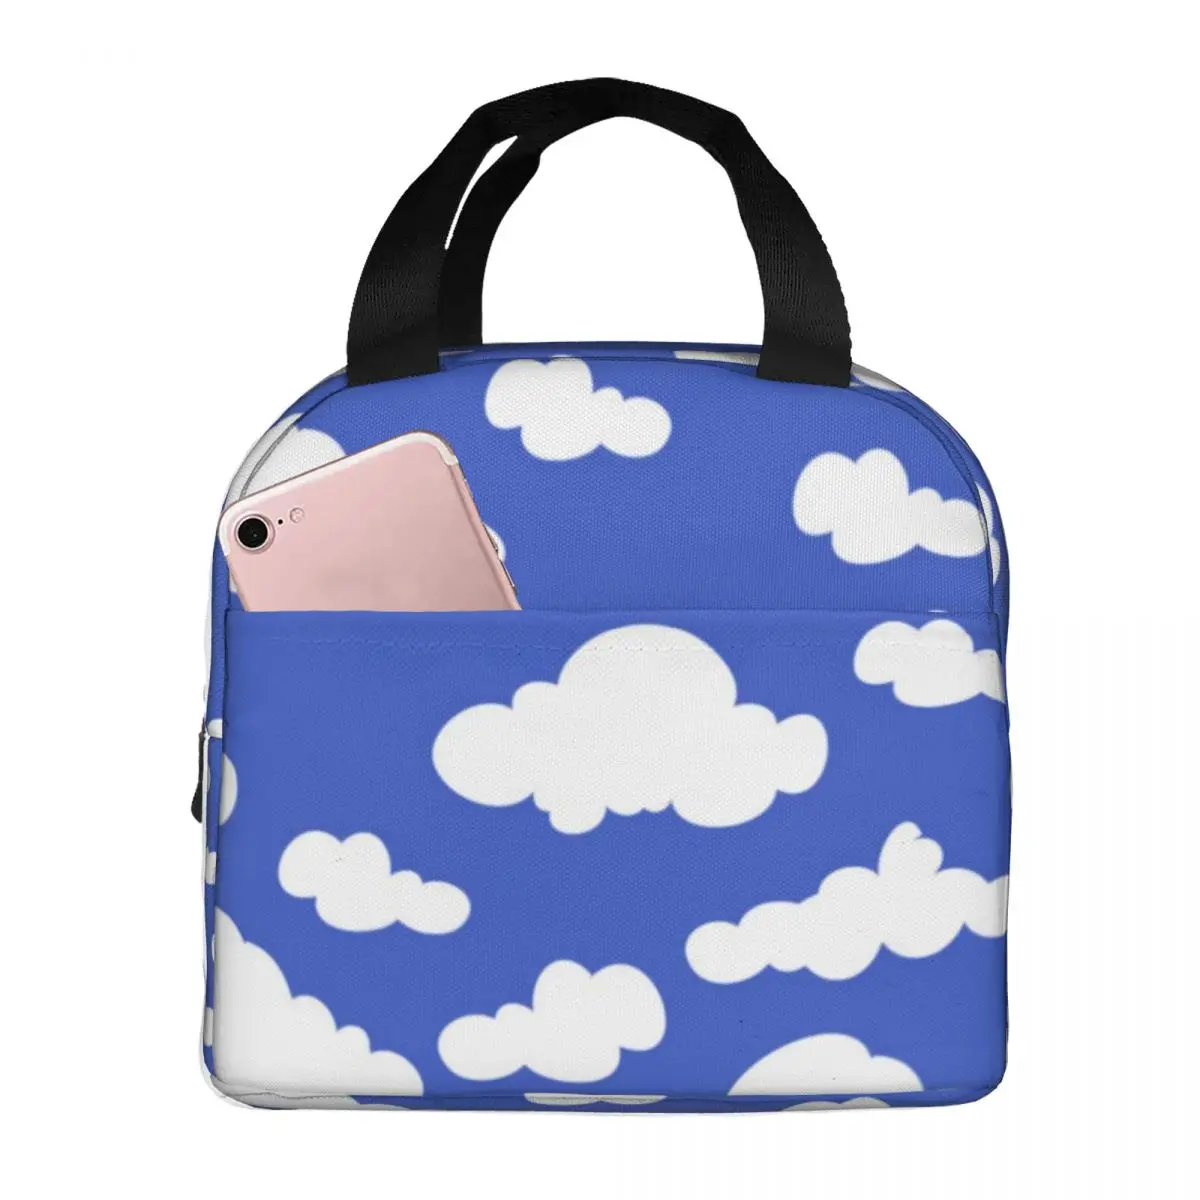 

Cartoon Cloud Lunch Bag with Handle Cloudy Blue Sky Beach Cooler Bag Cooling Aluminum Fancy Thermal Bag